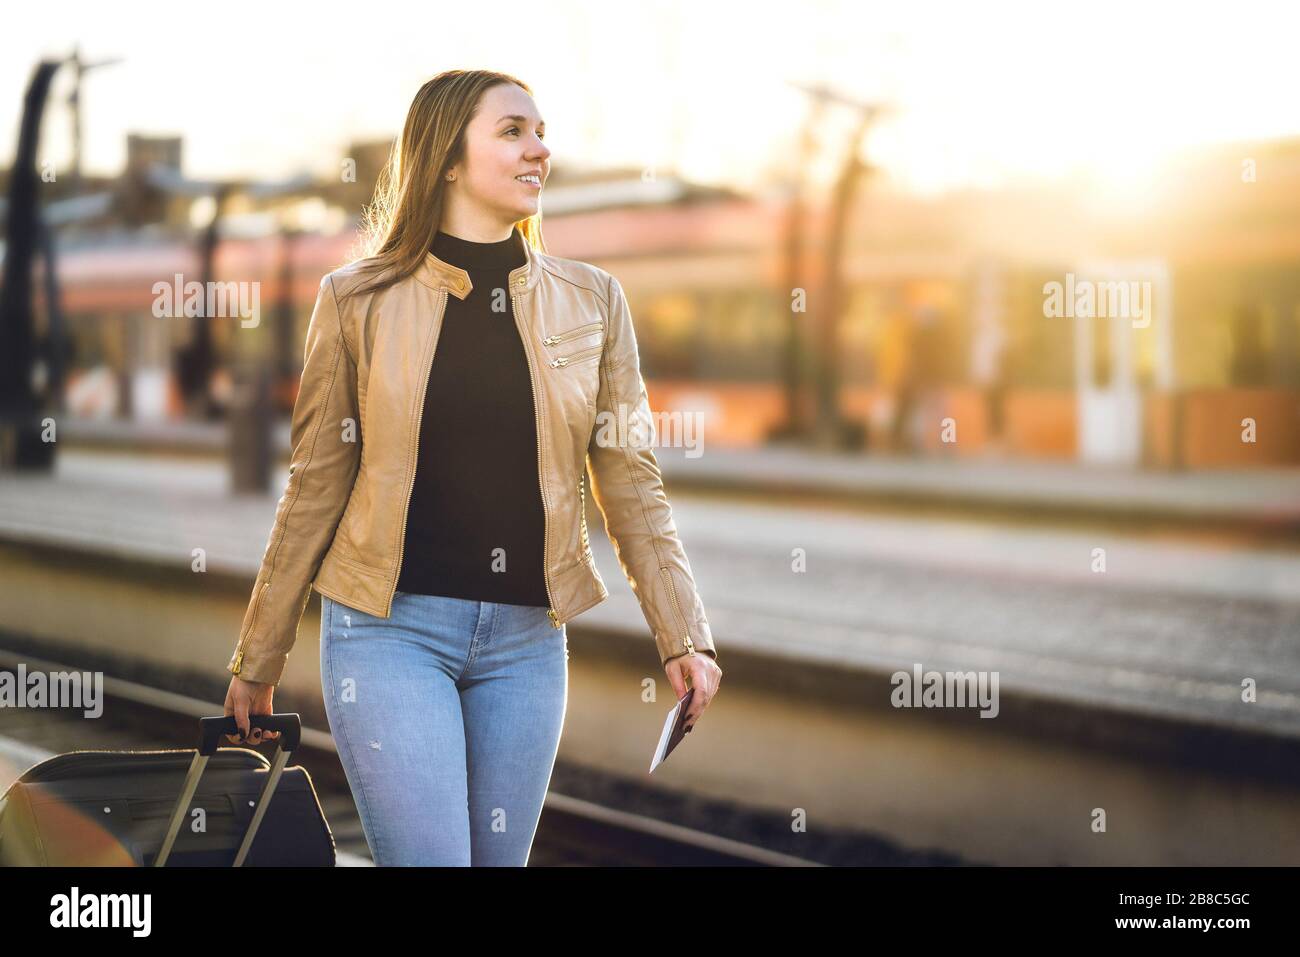 Happy woman pulling suitcase in train station. Smiling lady with baggage and luggage arrived to destination. Tourist on vacation. Stock Photo